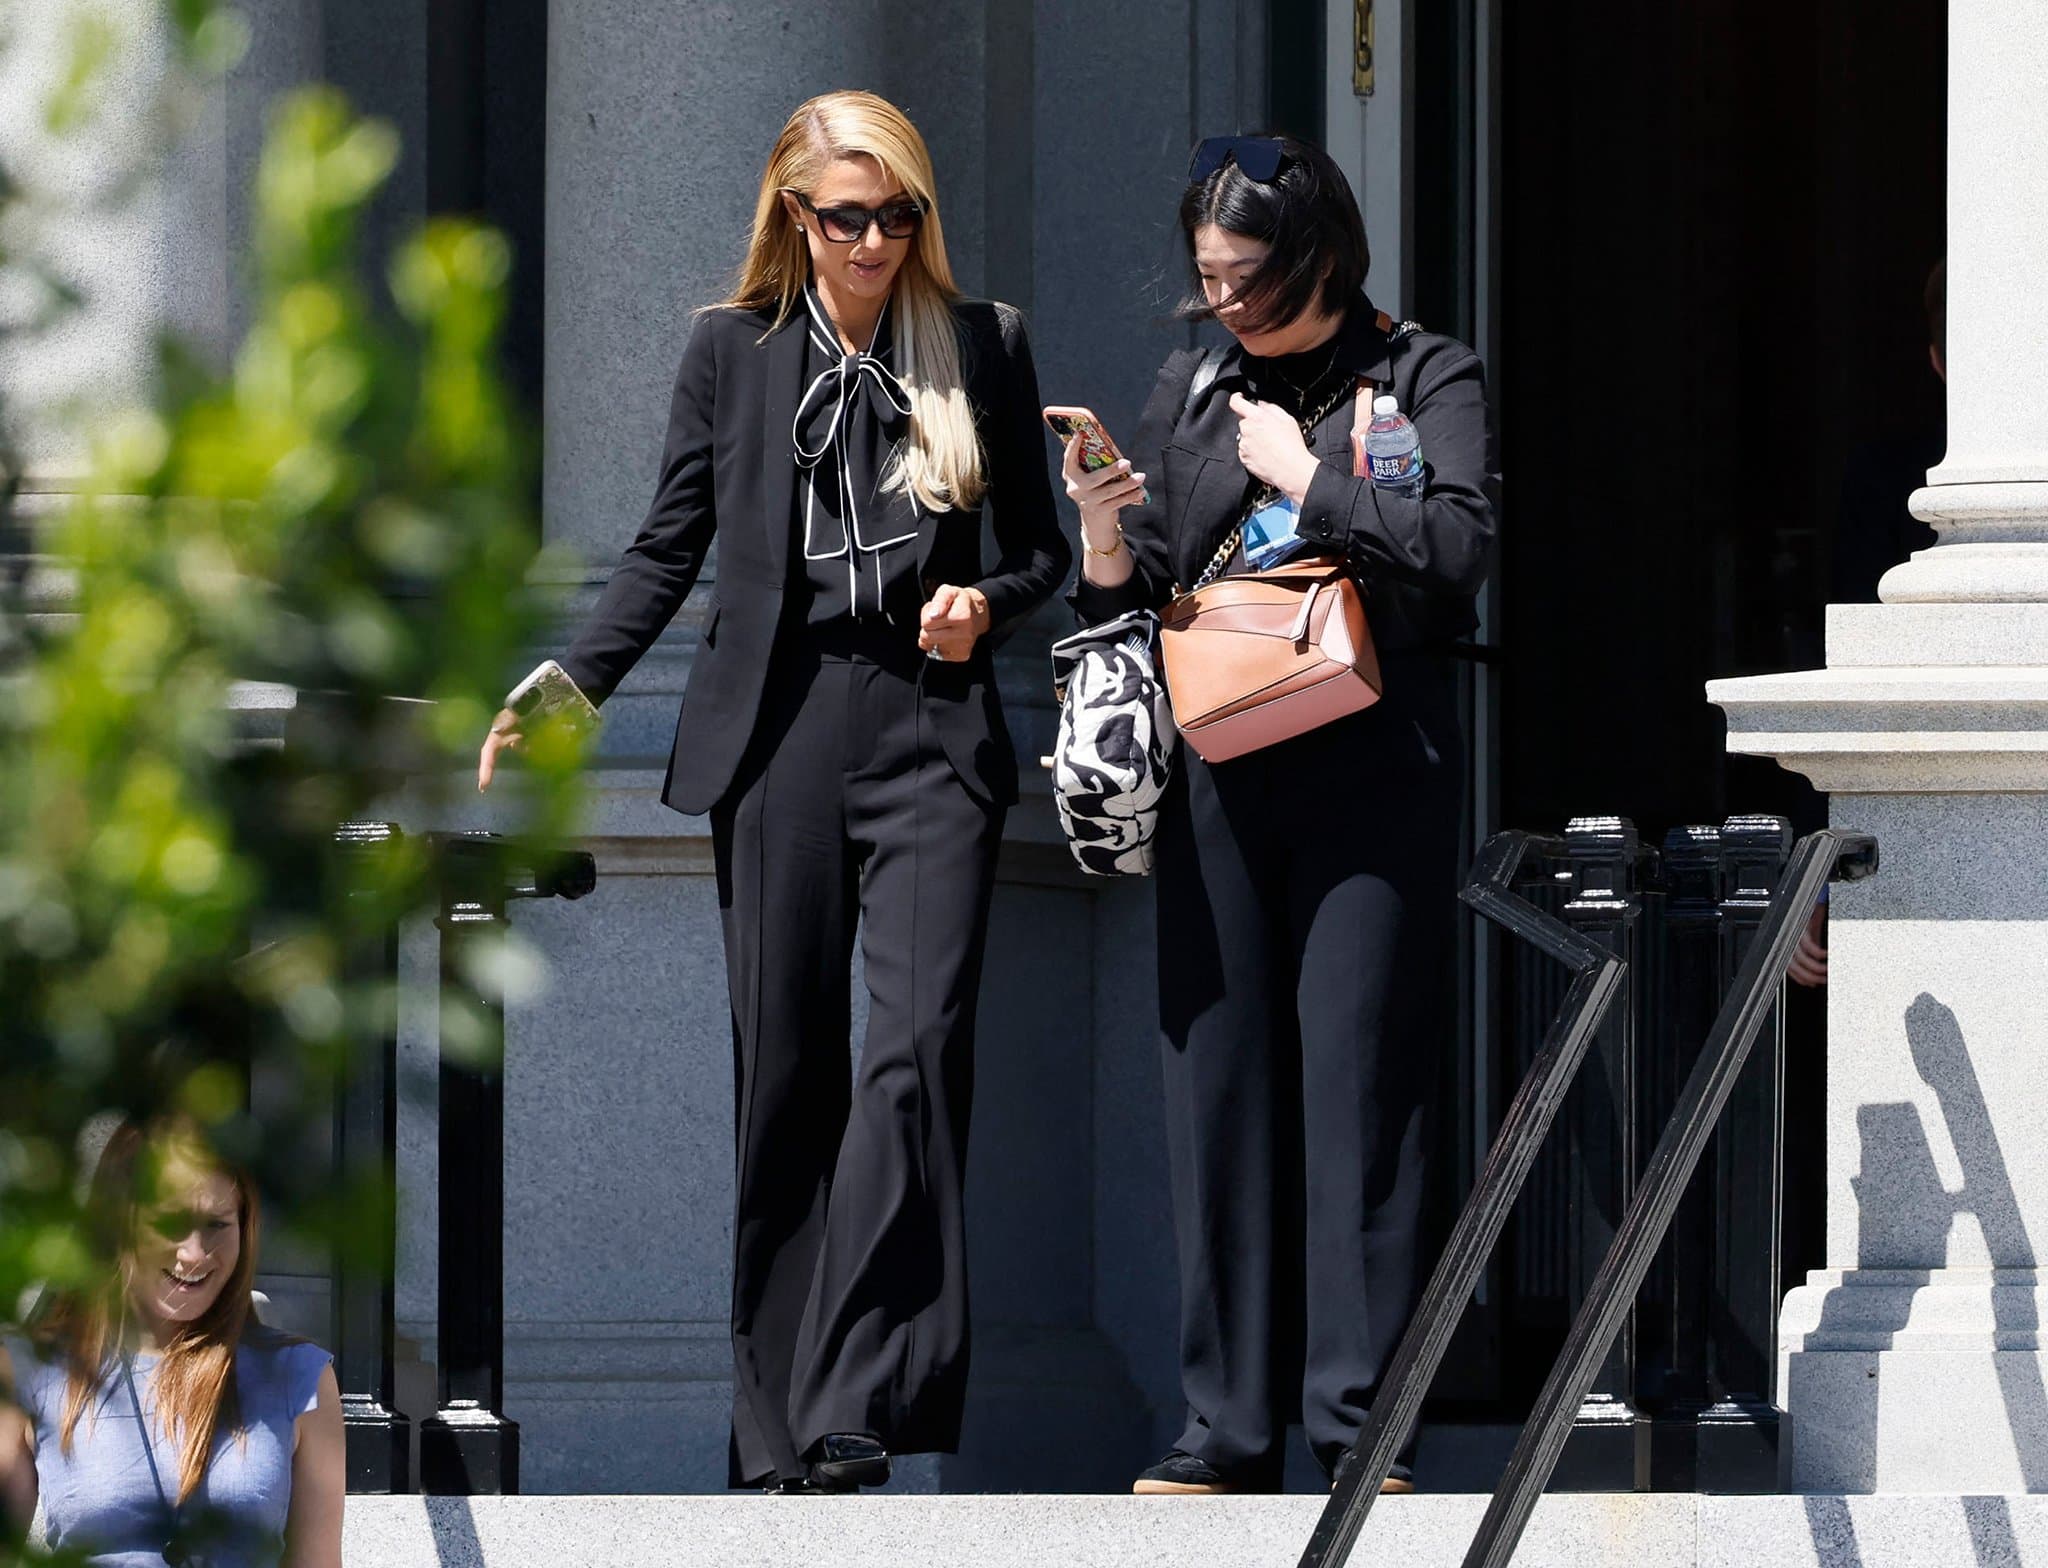 Paris Hilton visits the White House to meet with policy staff as part of her ongoing advocacy efforts against child abuse